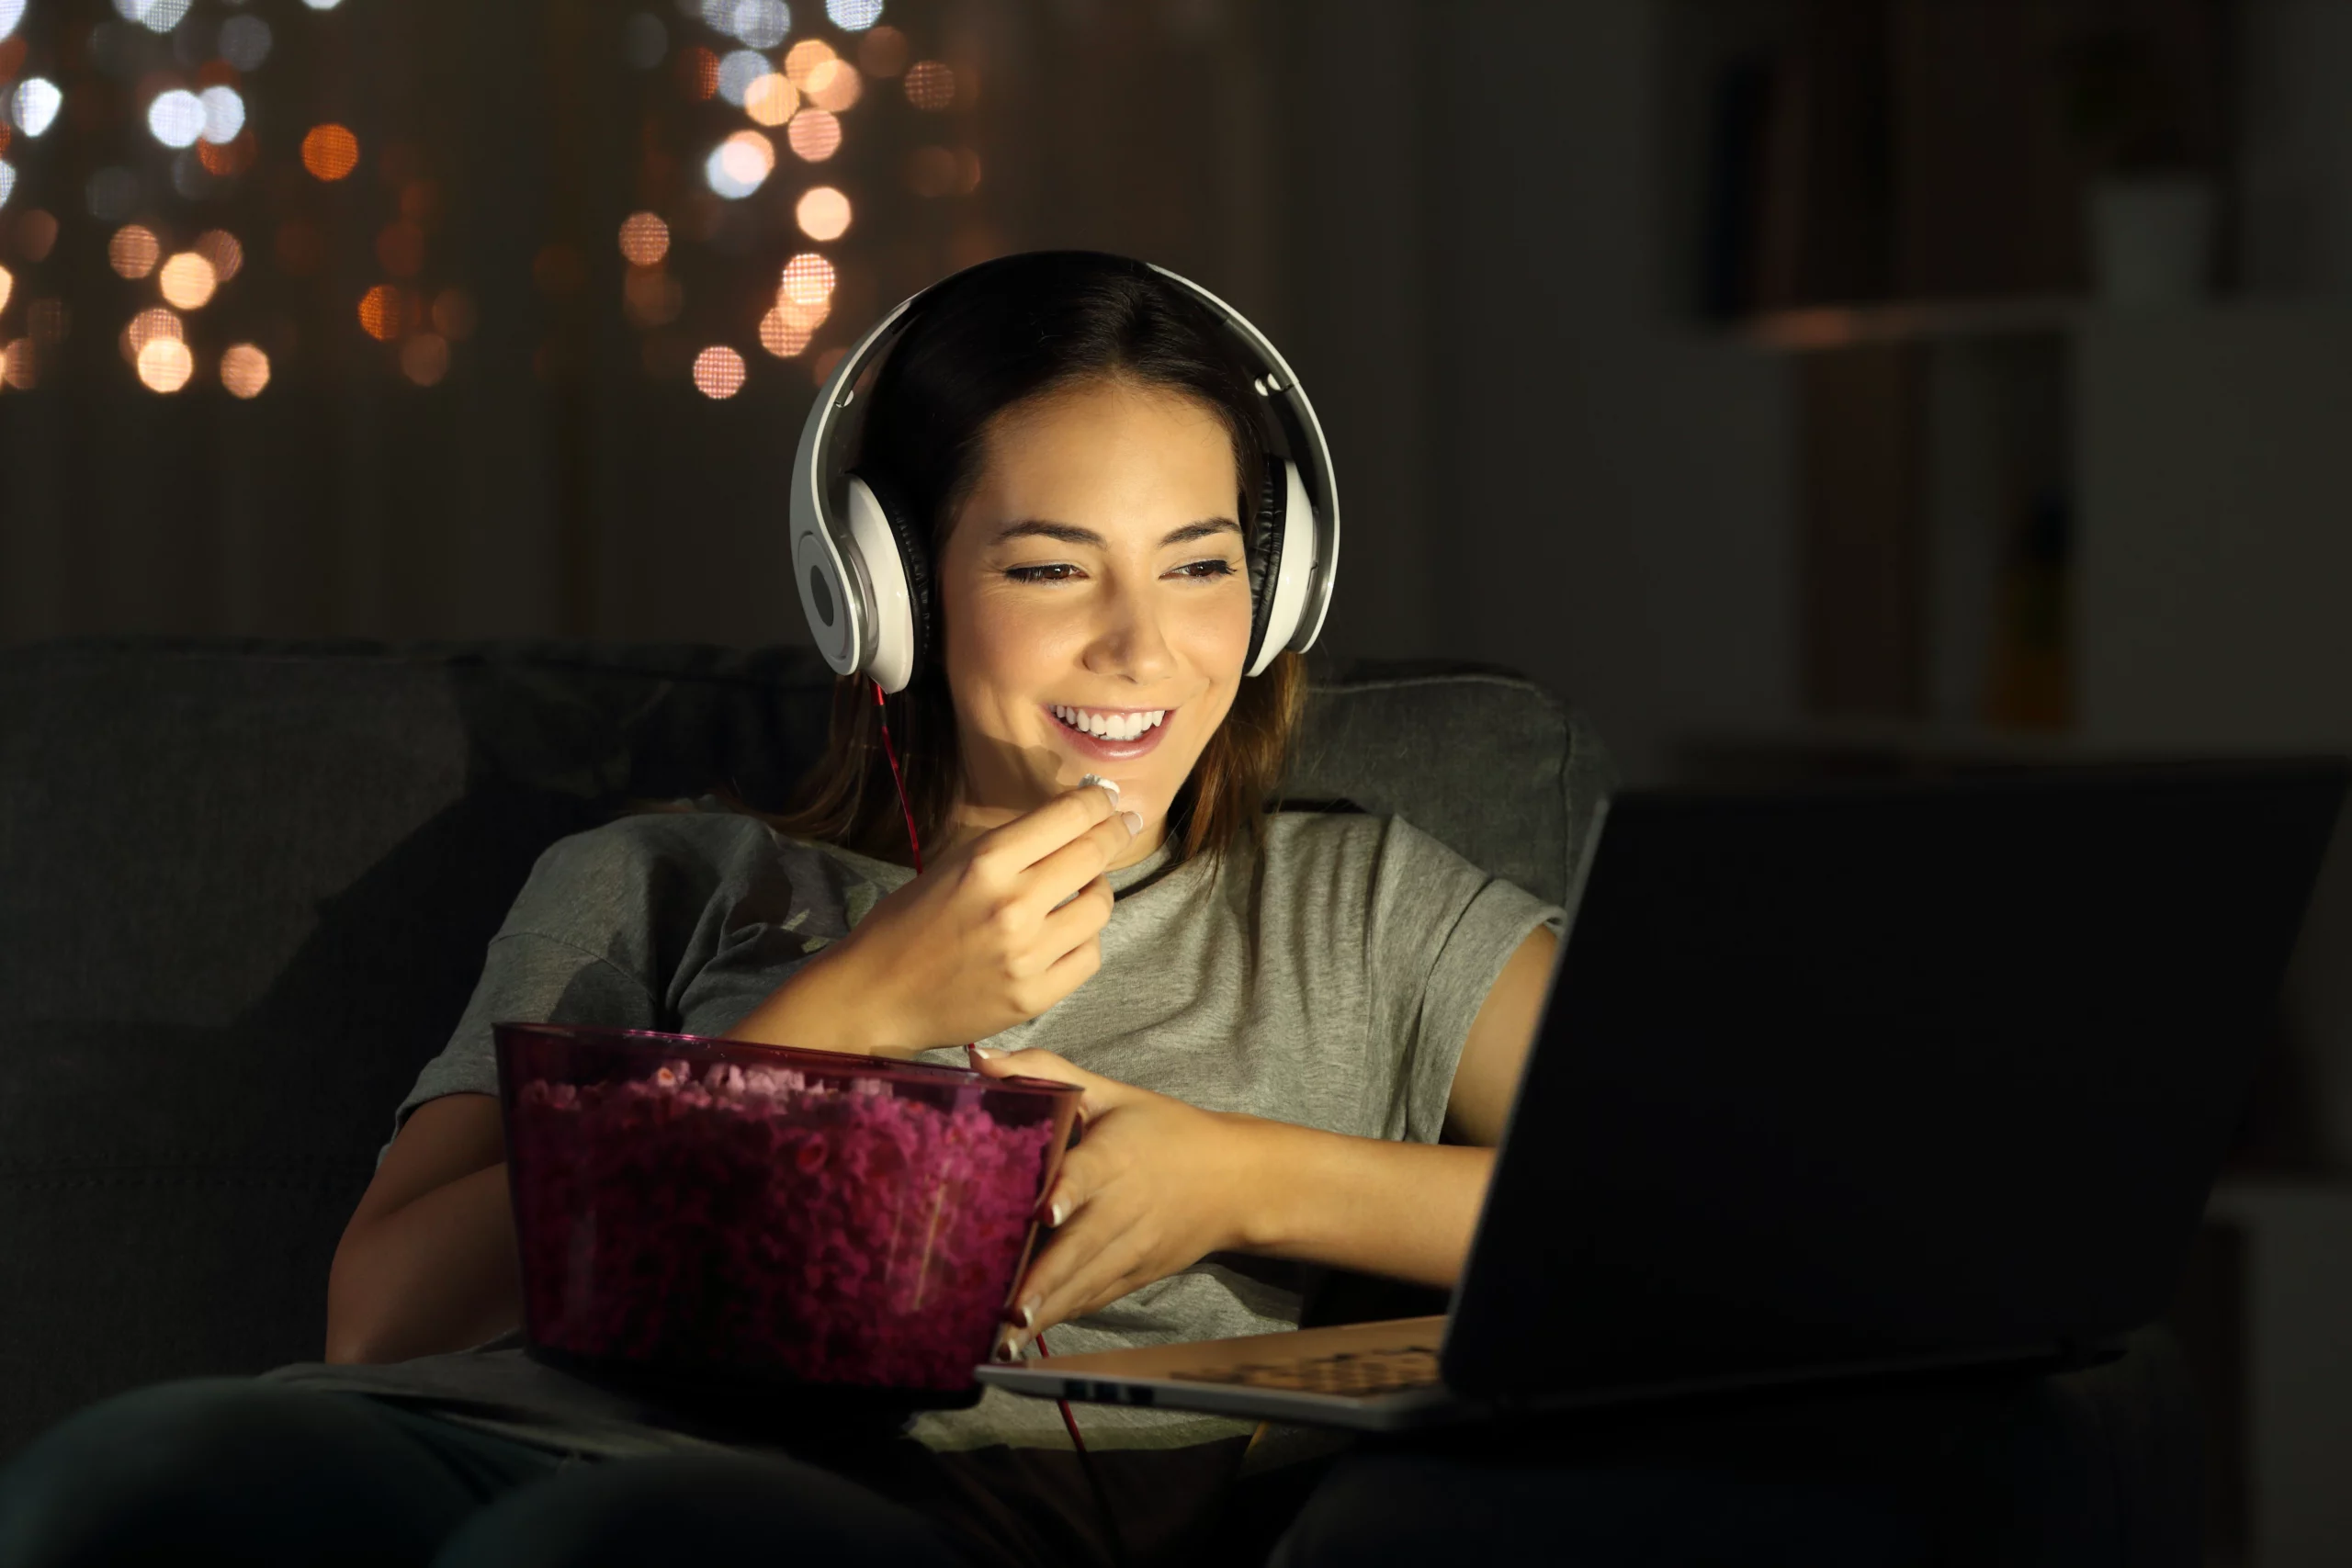 free alternatives to netflix include free streaming apps like 9 now - swoosh finance